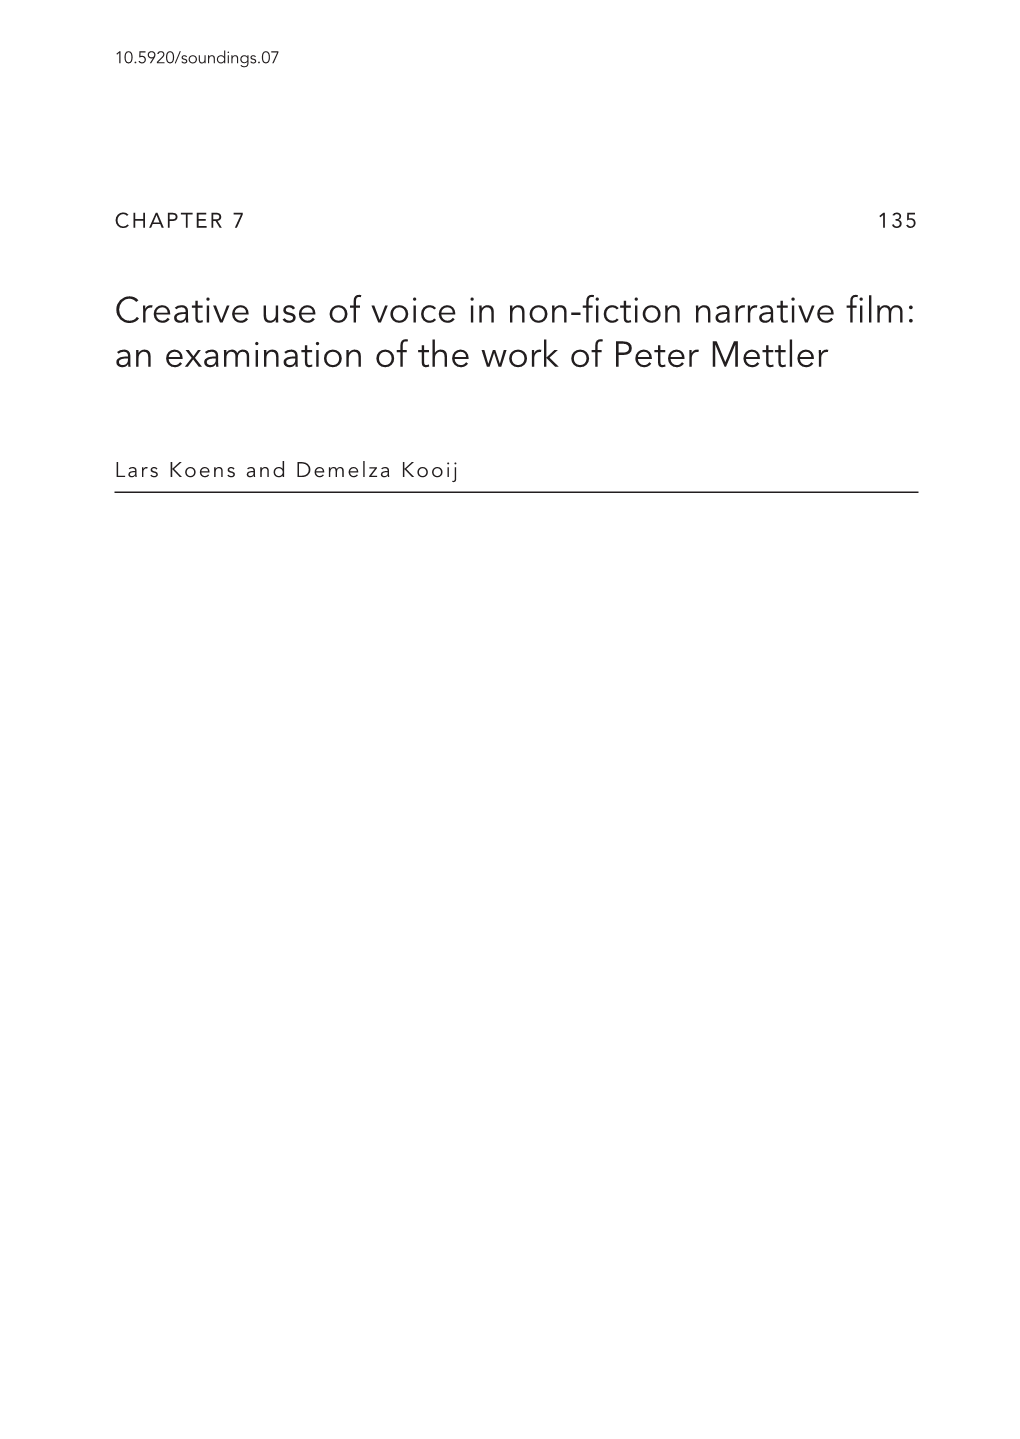 Creative Use of Voice in Non-Fiction Narrative Film: an Examination of the Work of Peter Mettler